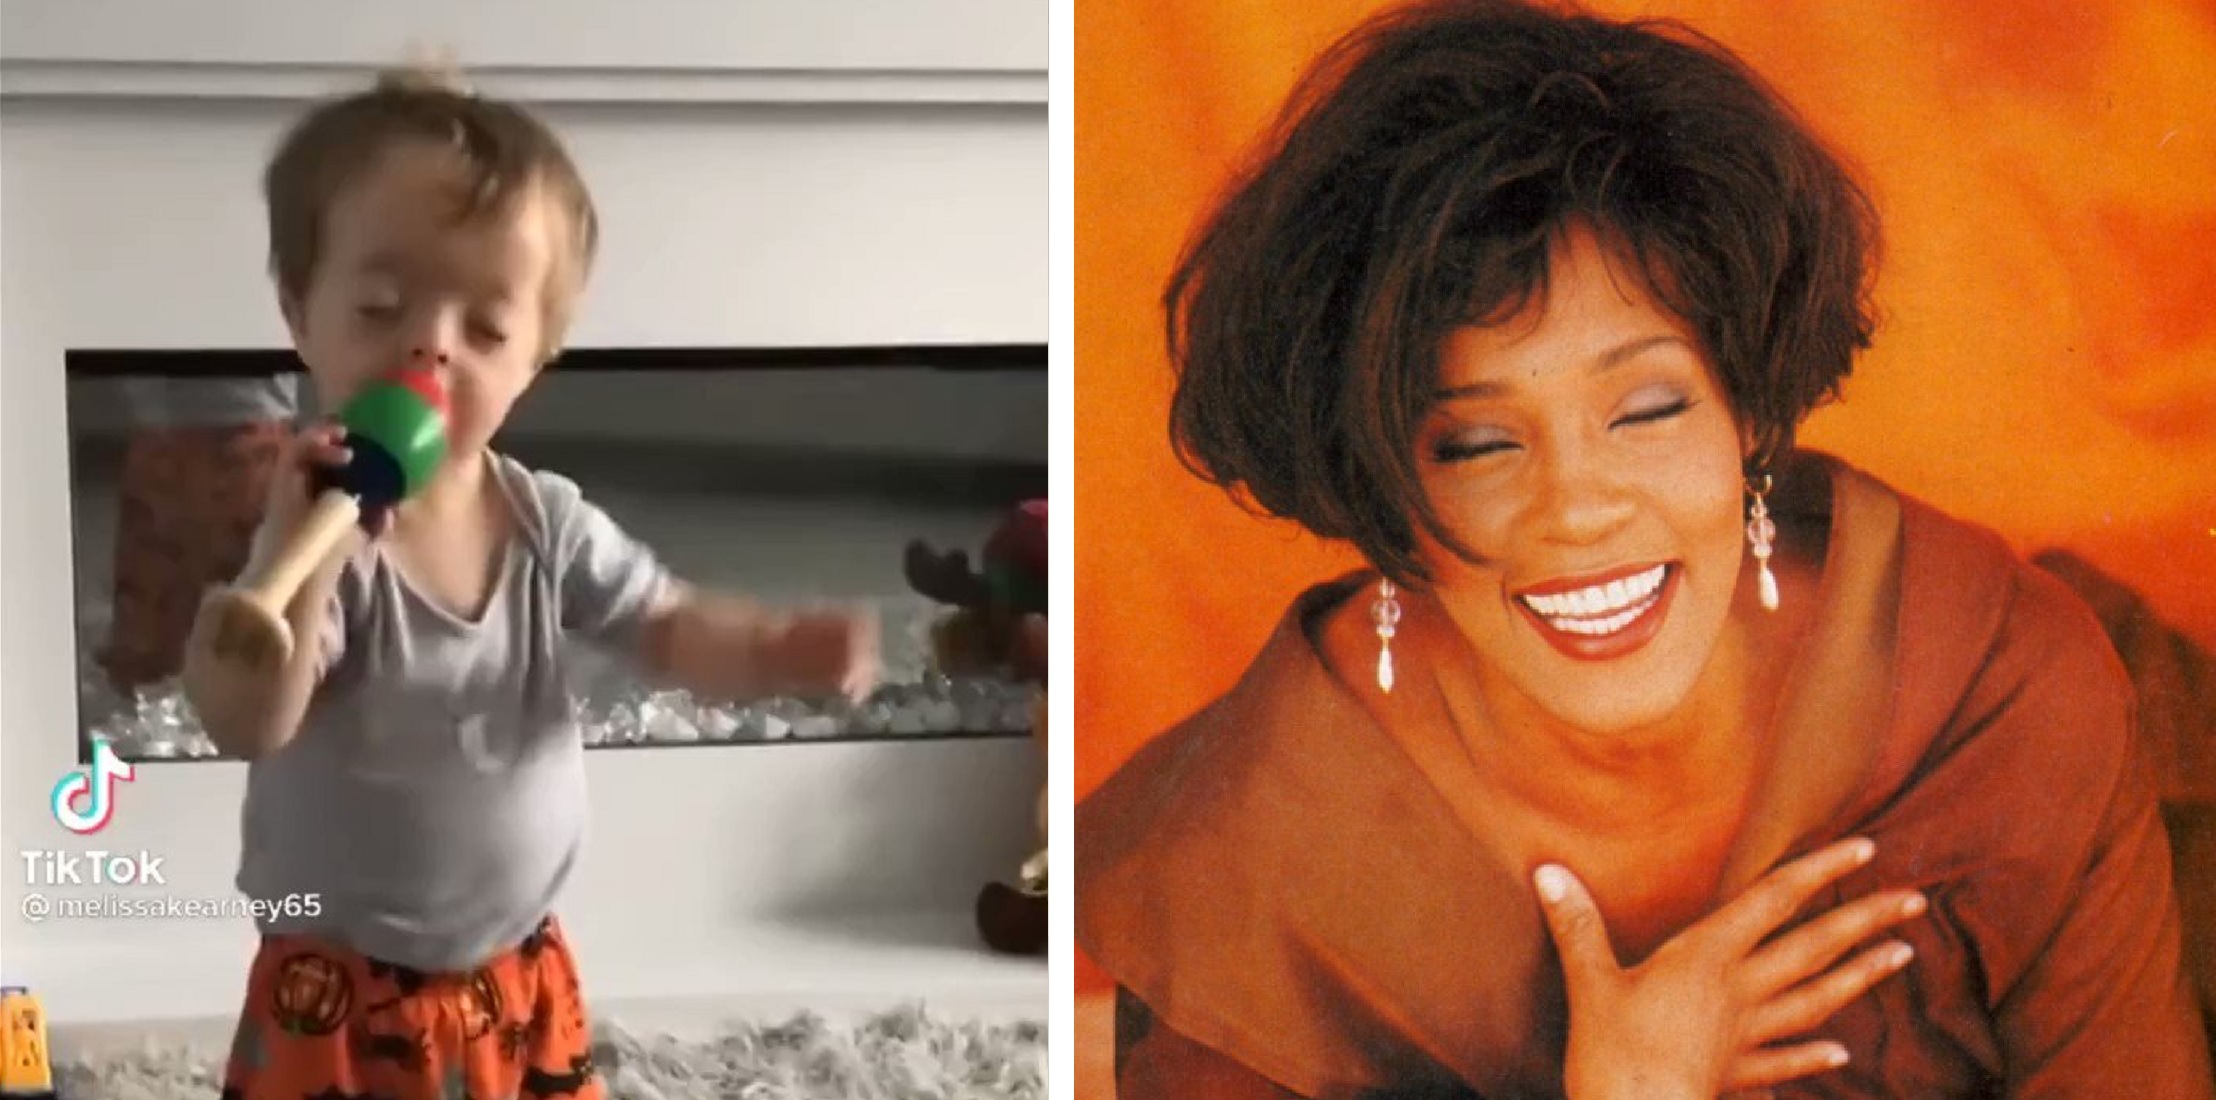 This Little Guy’s Adorable Lip-sync To Whitney Houston’s ‘I Have Nothing’ Will Win Your Heart!